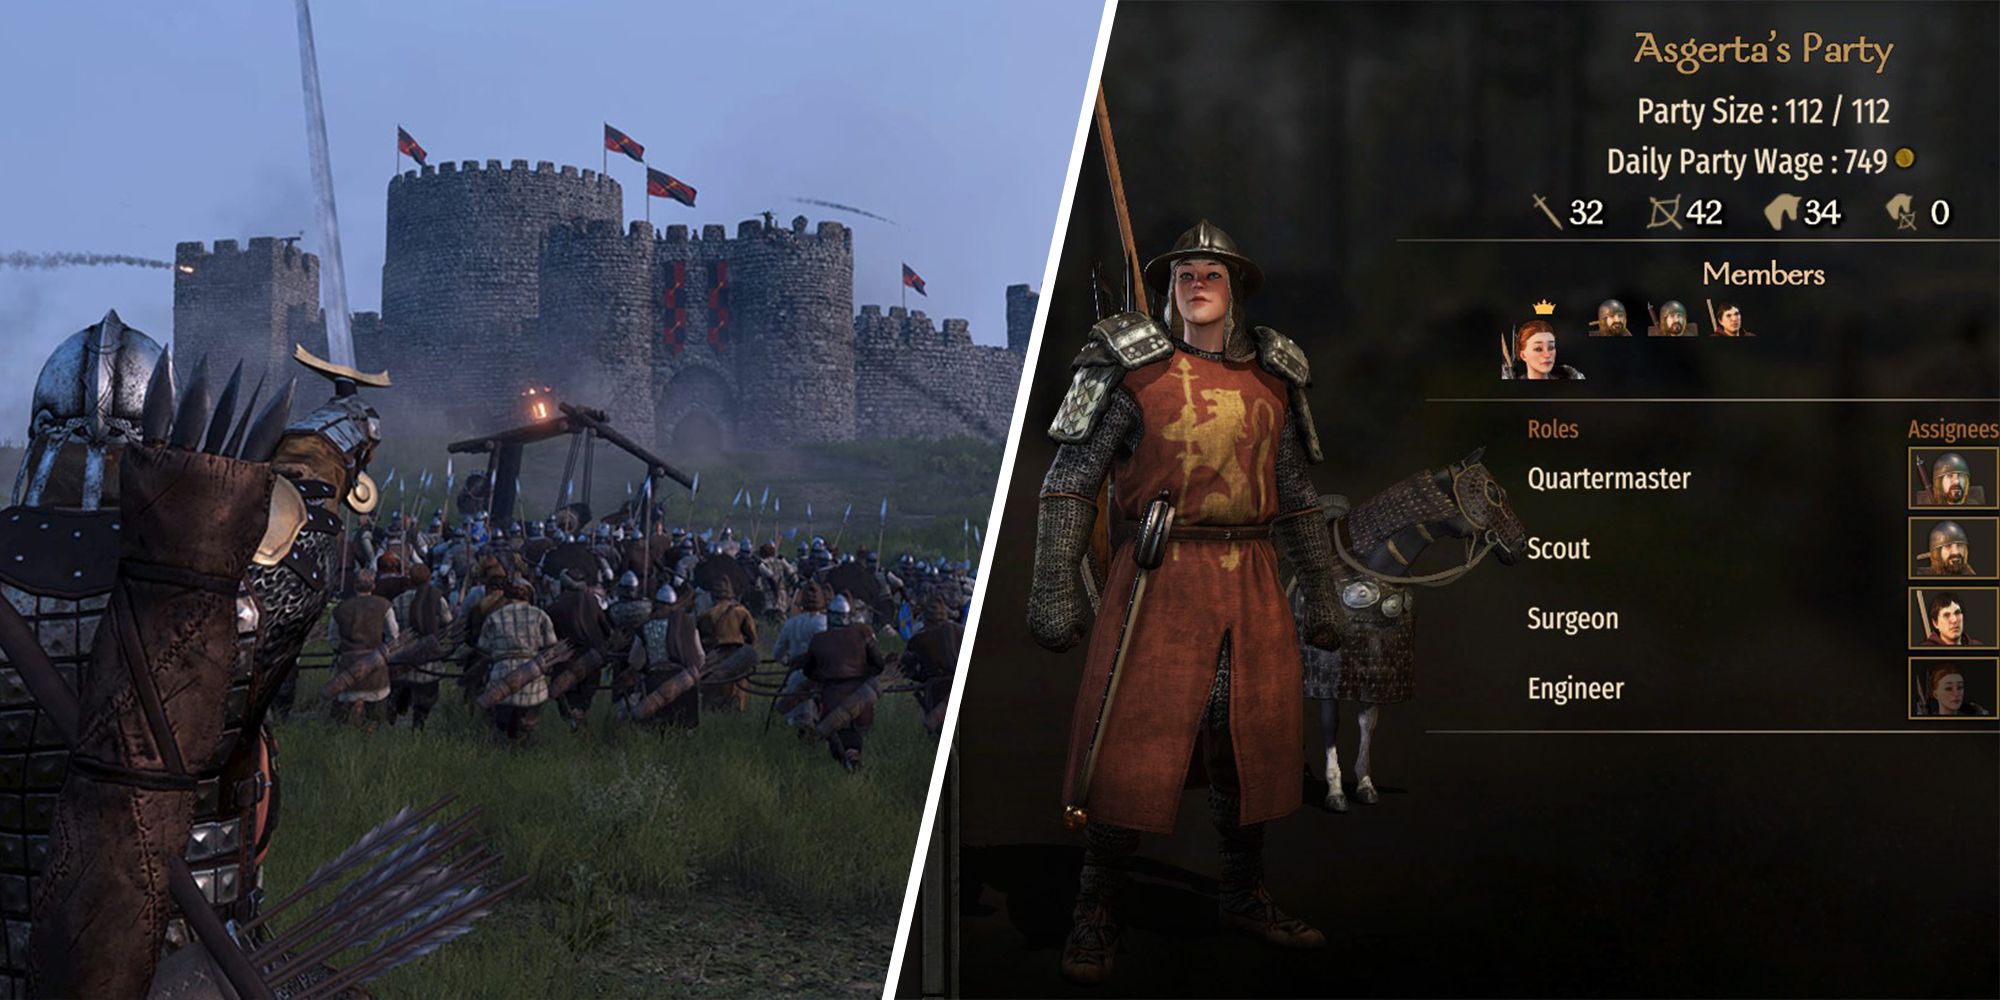 Split image of a siege battle and the party management page in Mount & Blade 2 Bannerlord.